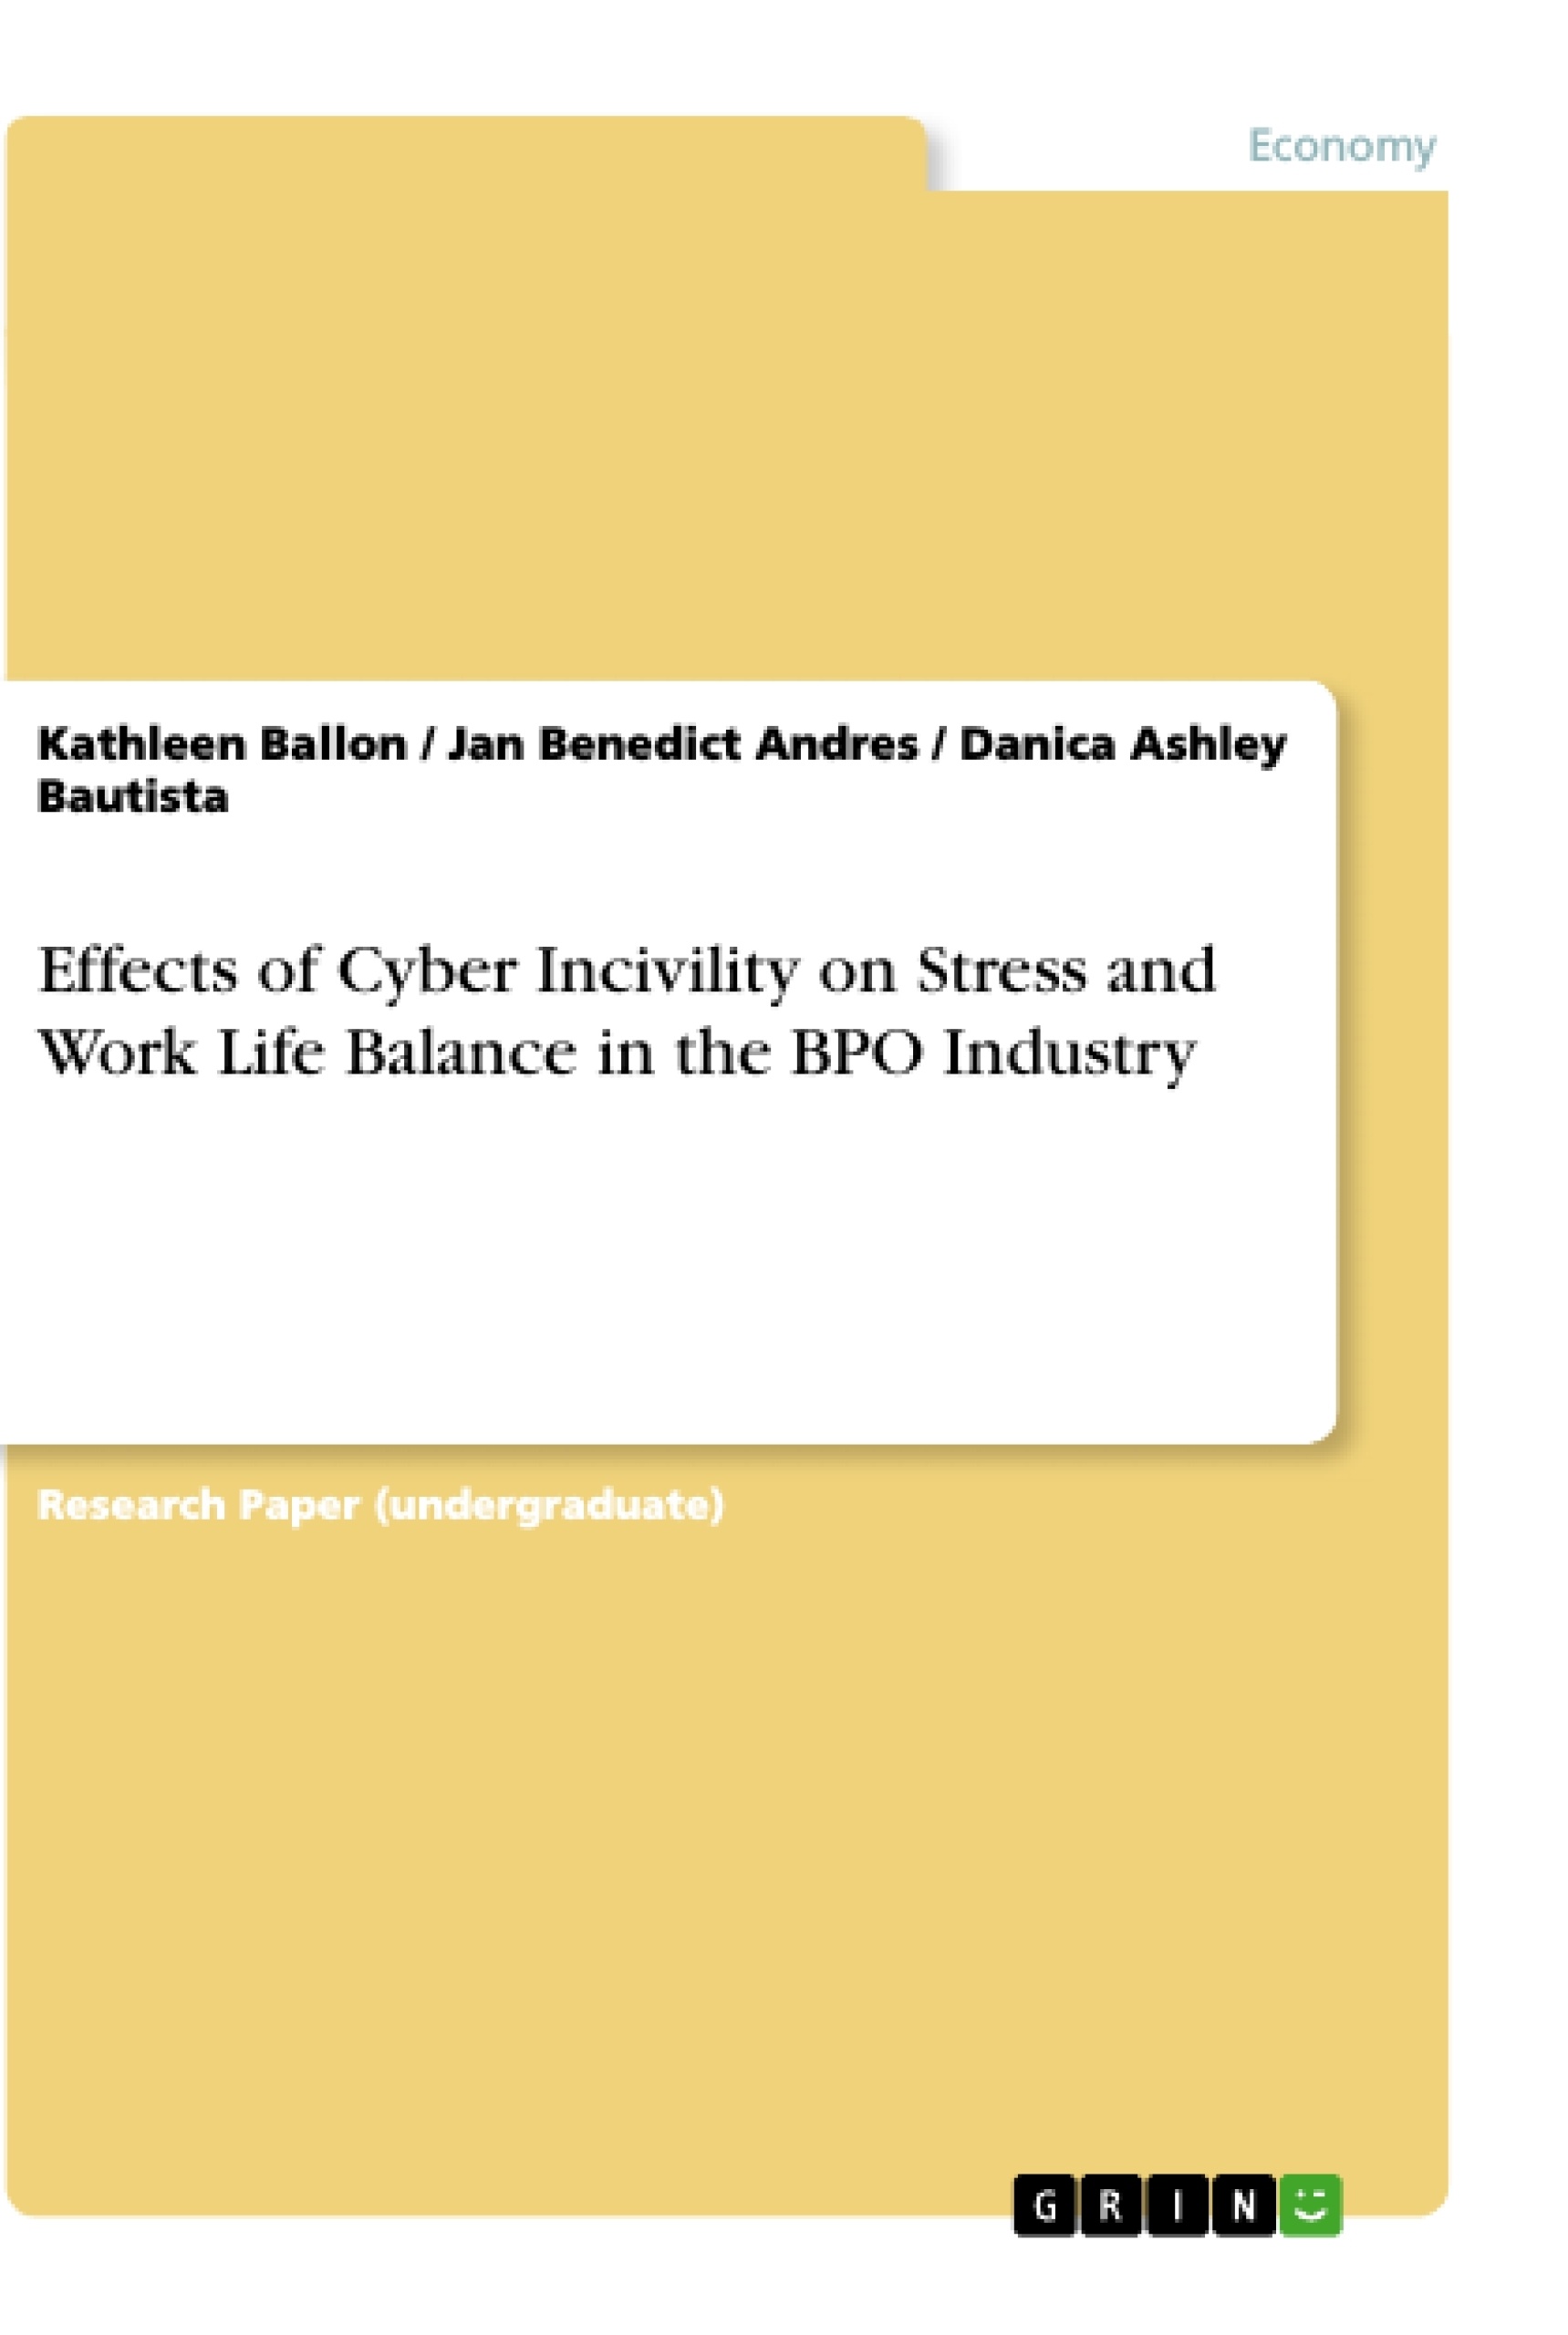 Title: Effects of Cyber Incivility on Stress and Work Life Balance in the BPO Industry